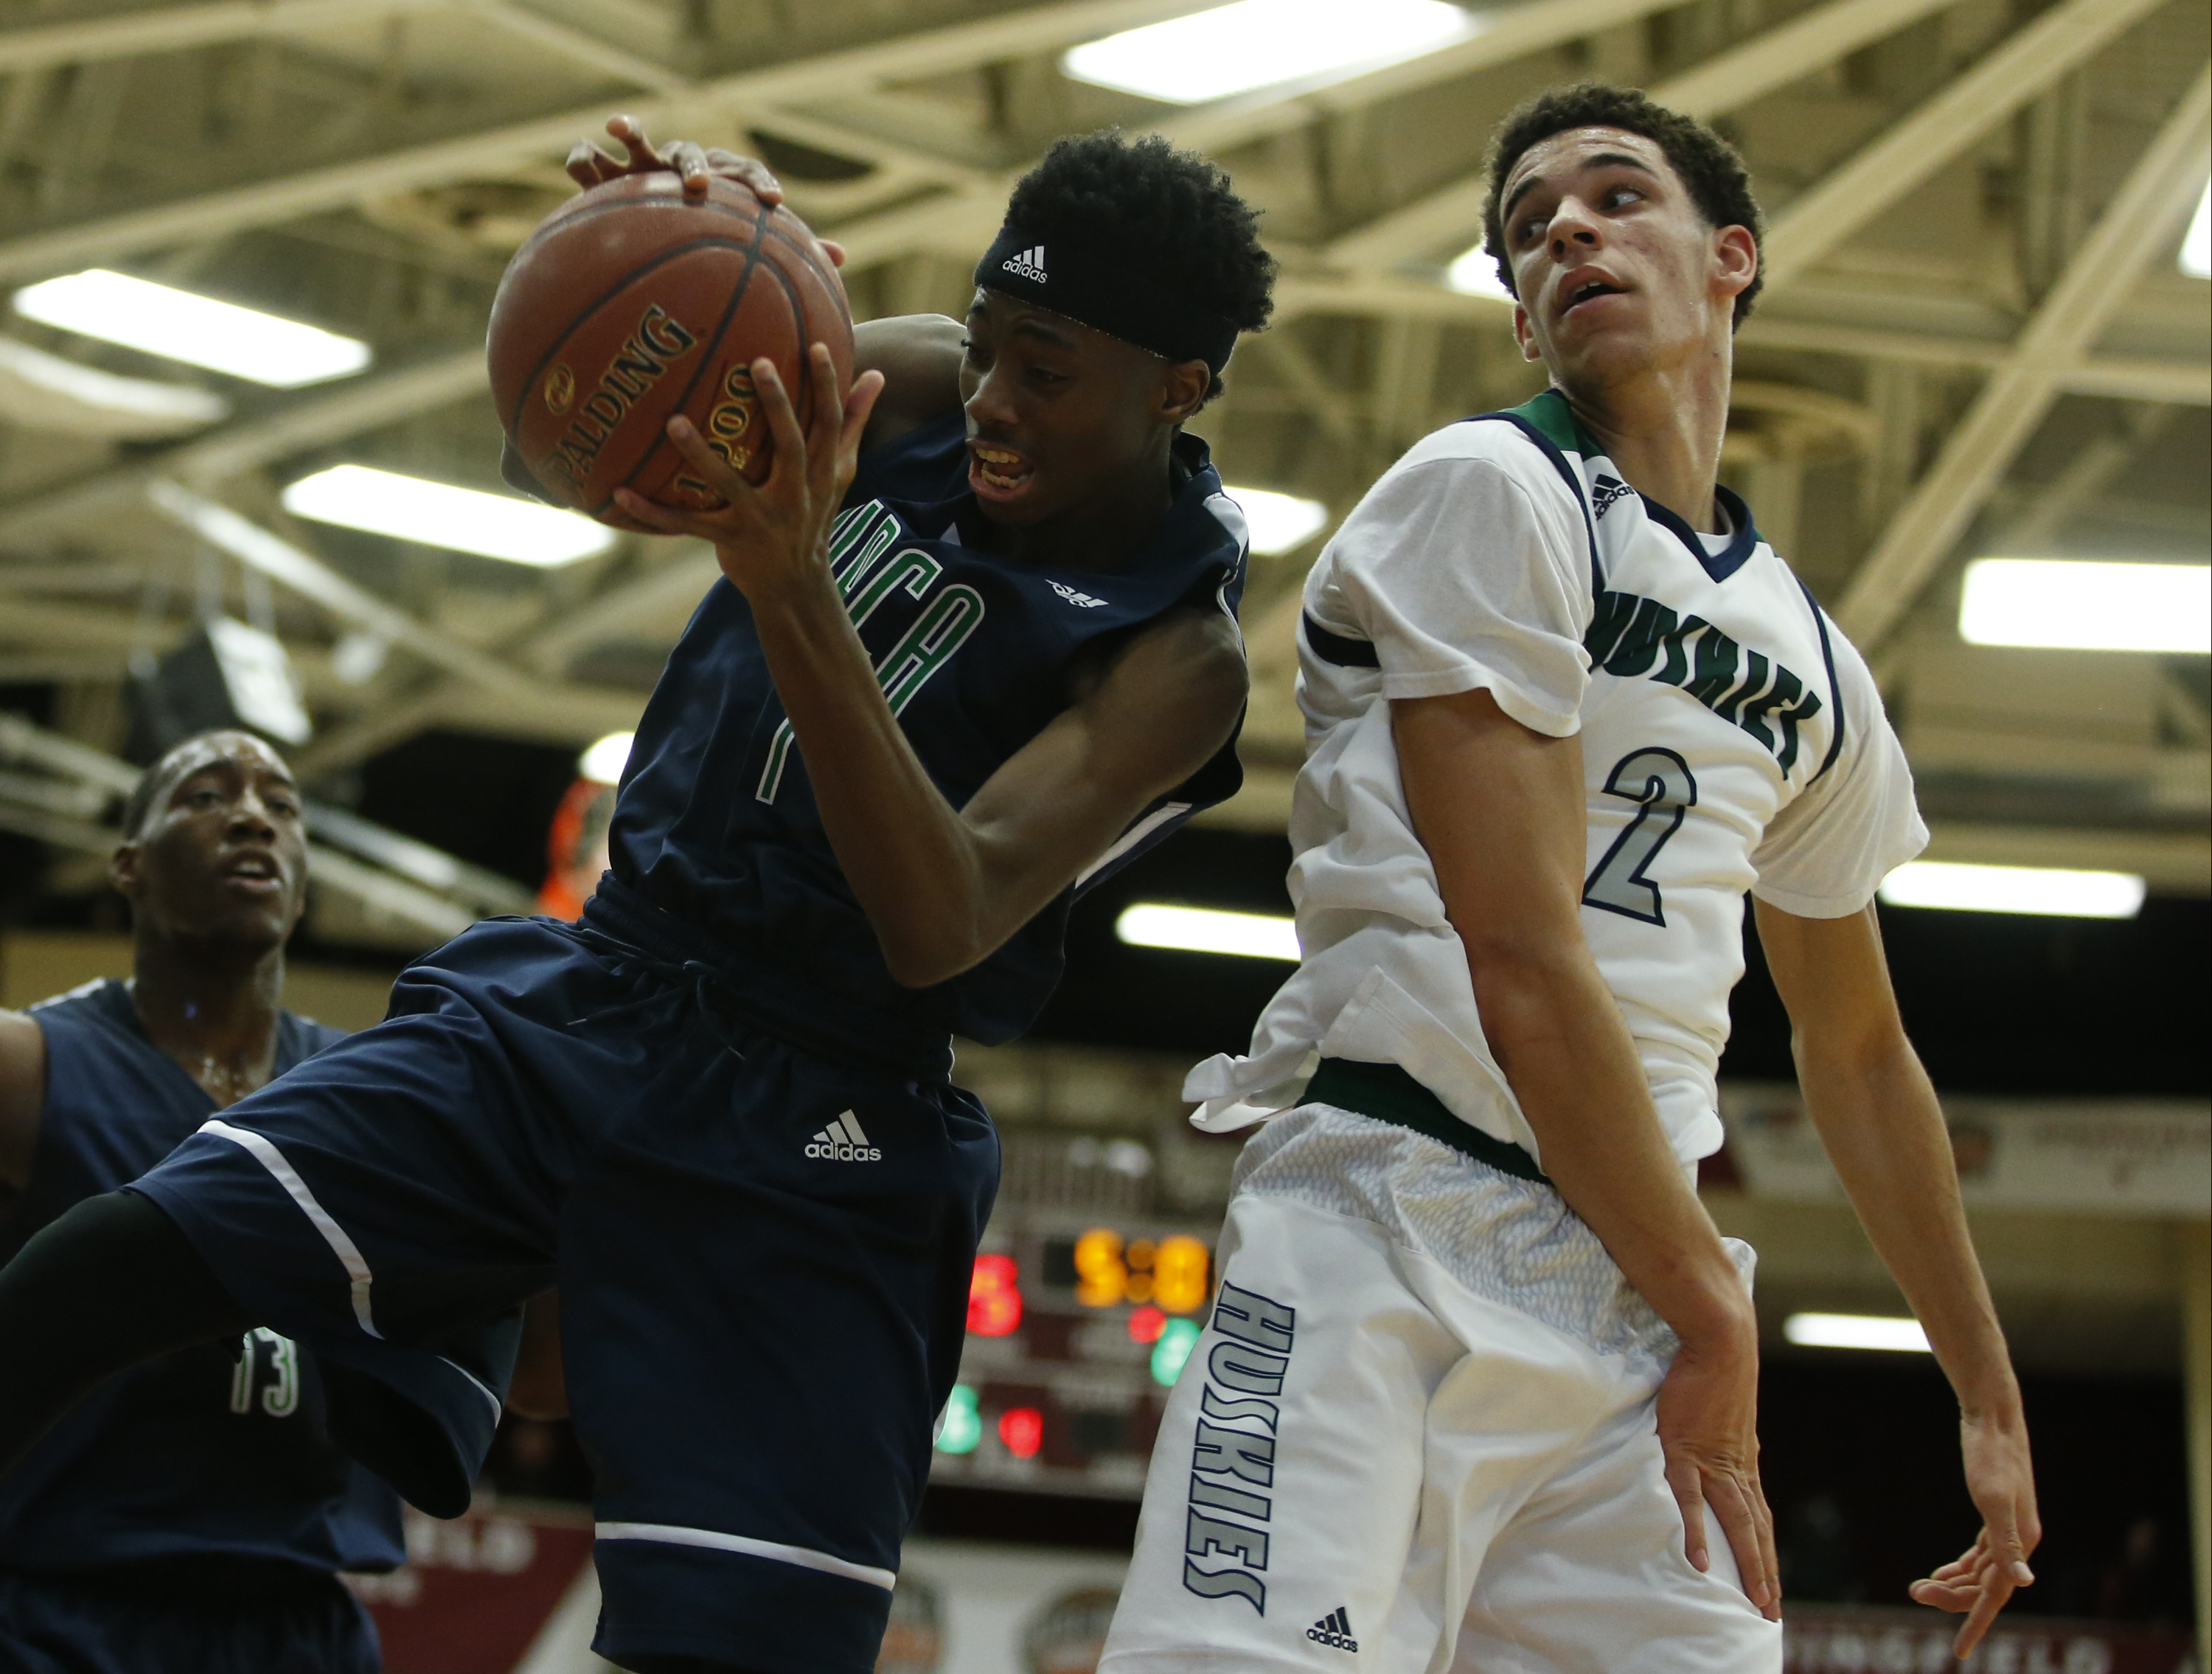 High Point Christian's Michael Hueitt, Jr. (11) and Chino Hills' Lonzo Ball go after a rebound (Photo: David Butler II, USA TODAY Sports)